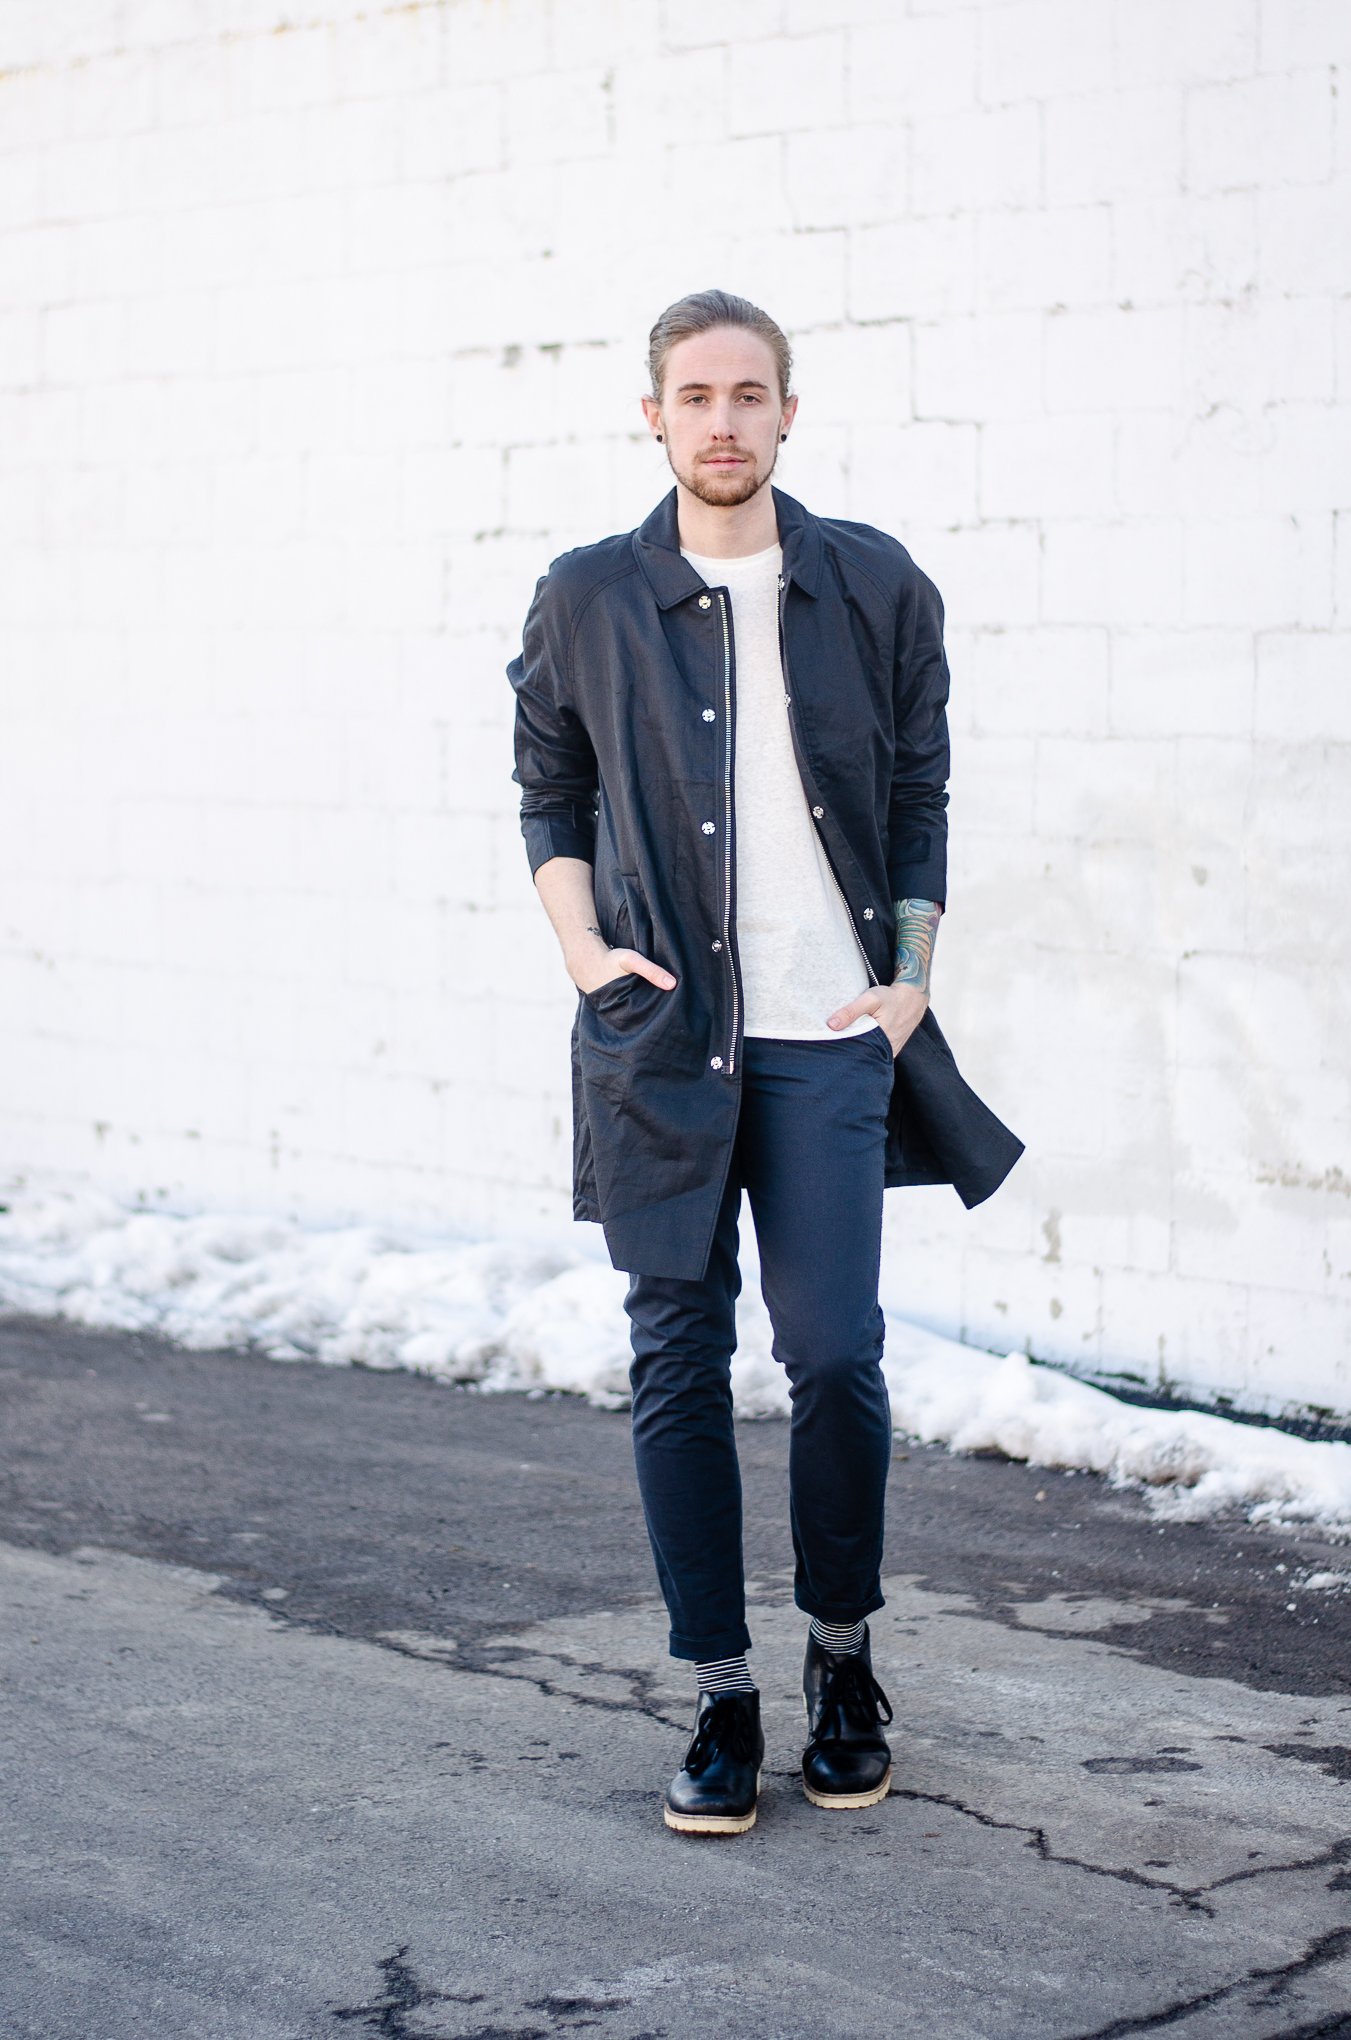 The Kentucky Gent, a men's fashion and lifestyle blogger, introduces H&M's Modern Essentials Selected by David Beckham.